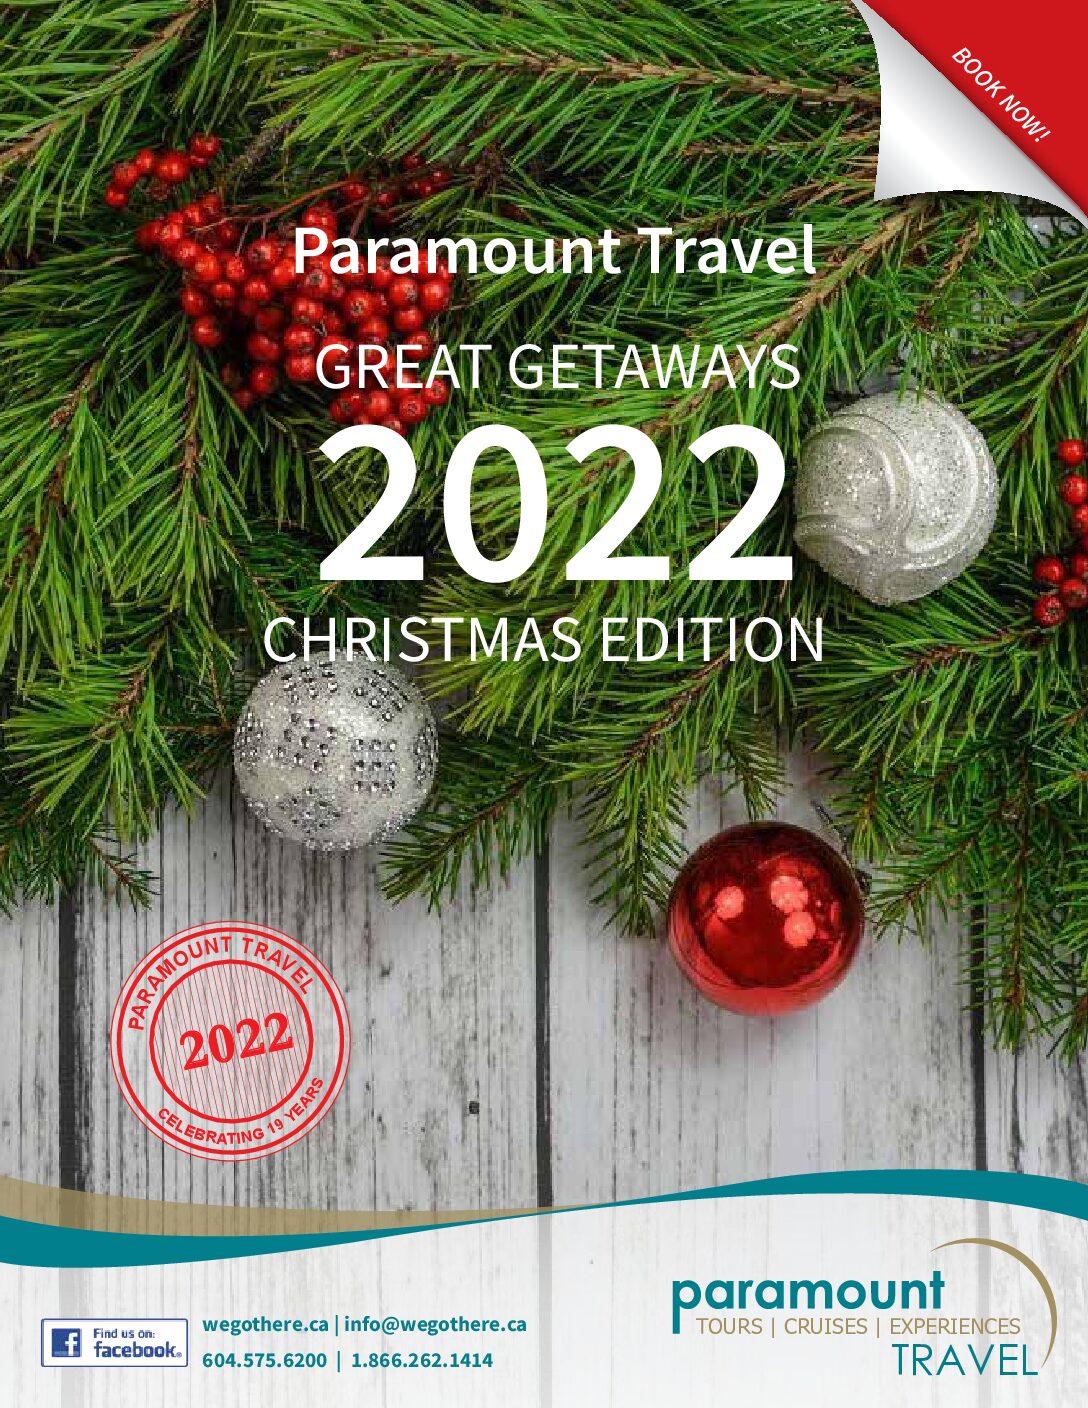 Christmas in Victoria - Paramount Travel